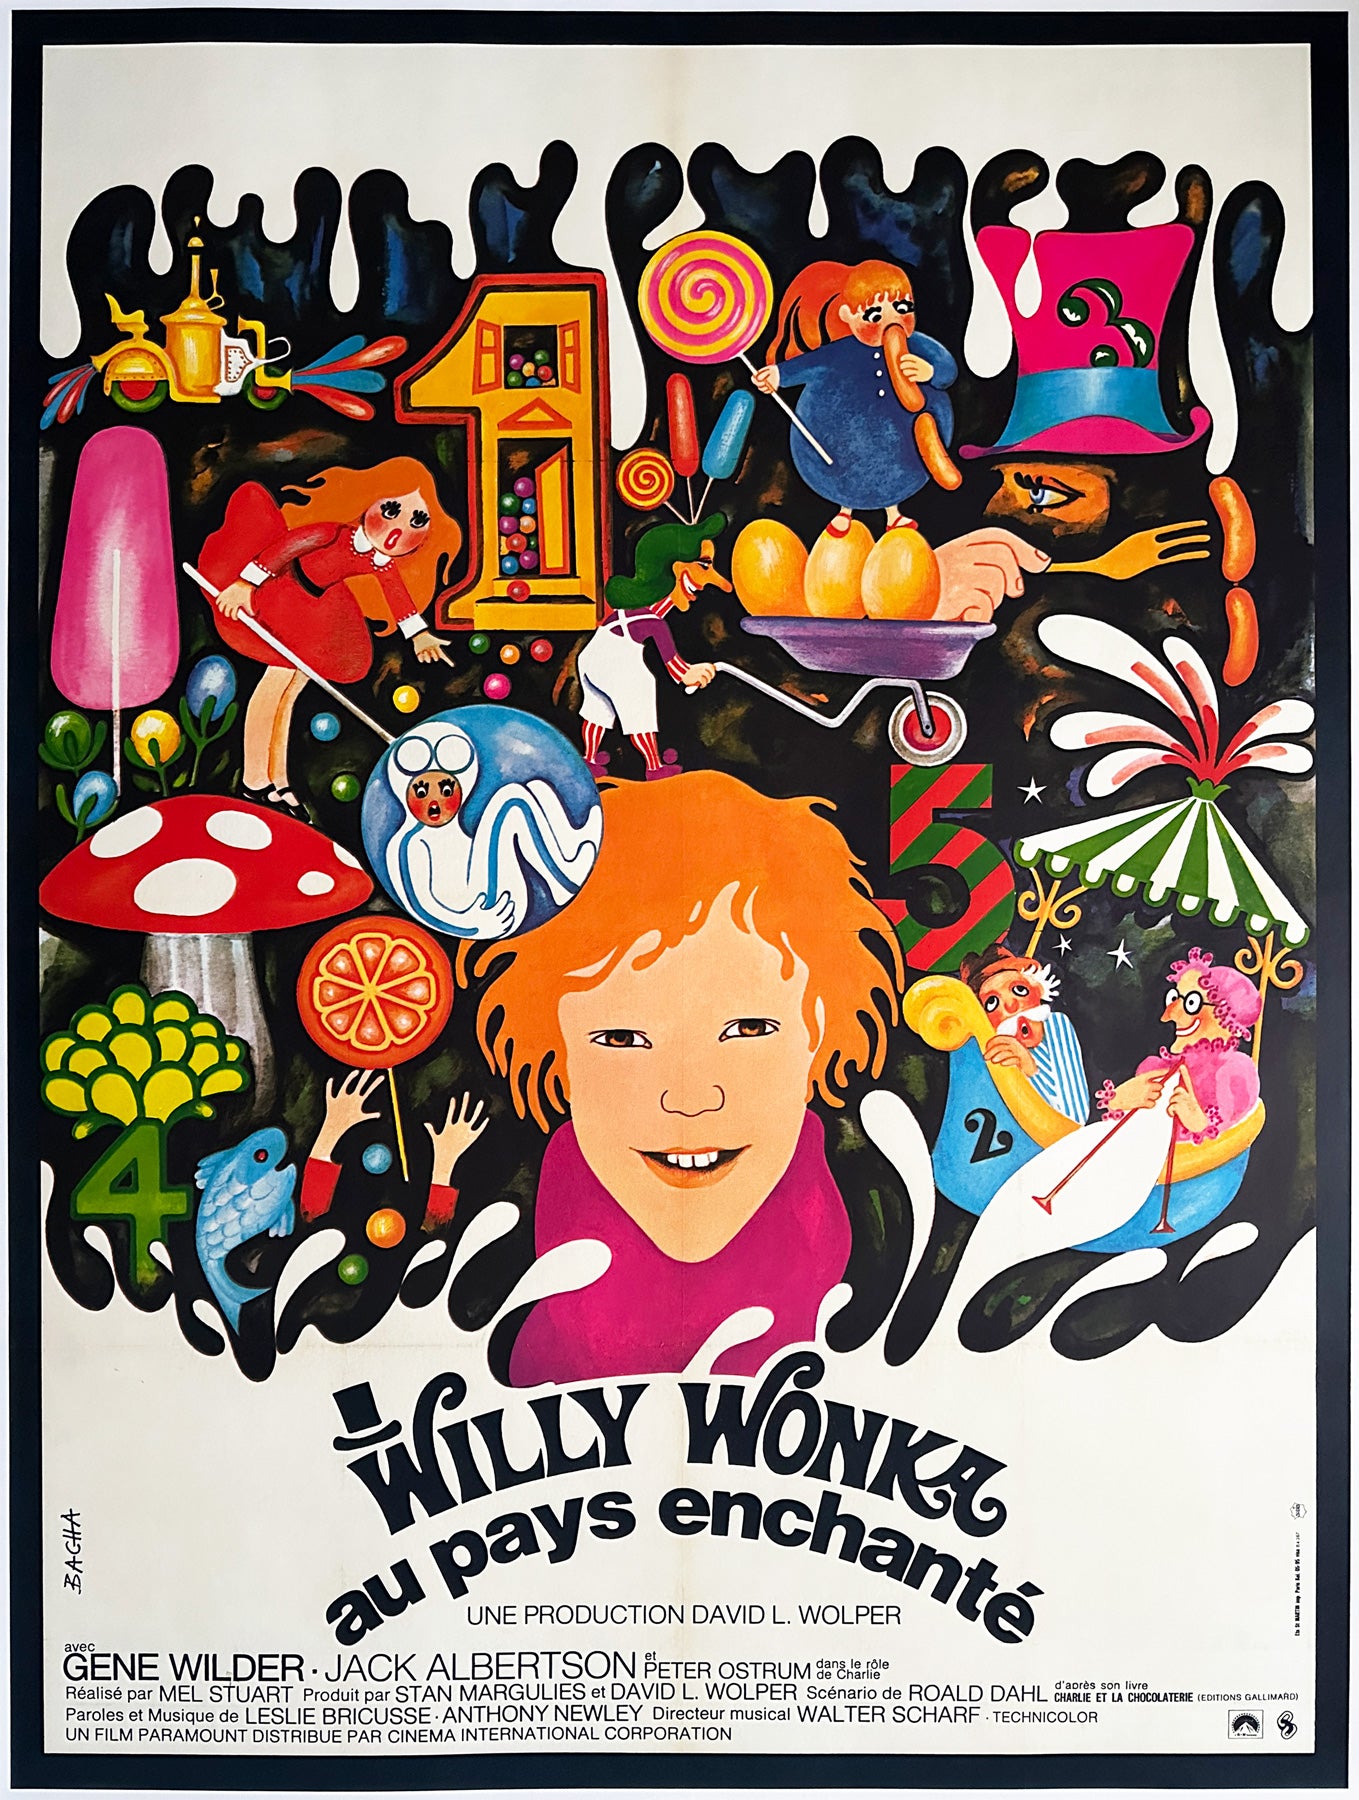 Willy Wonka and the Chocolate Factory 1971 French Grande Film Movie Poster, Bacha